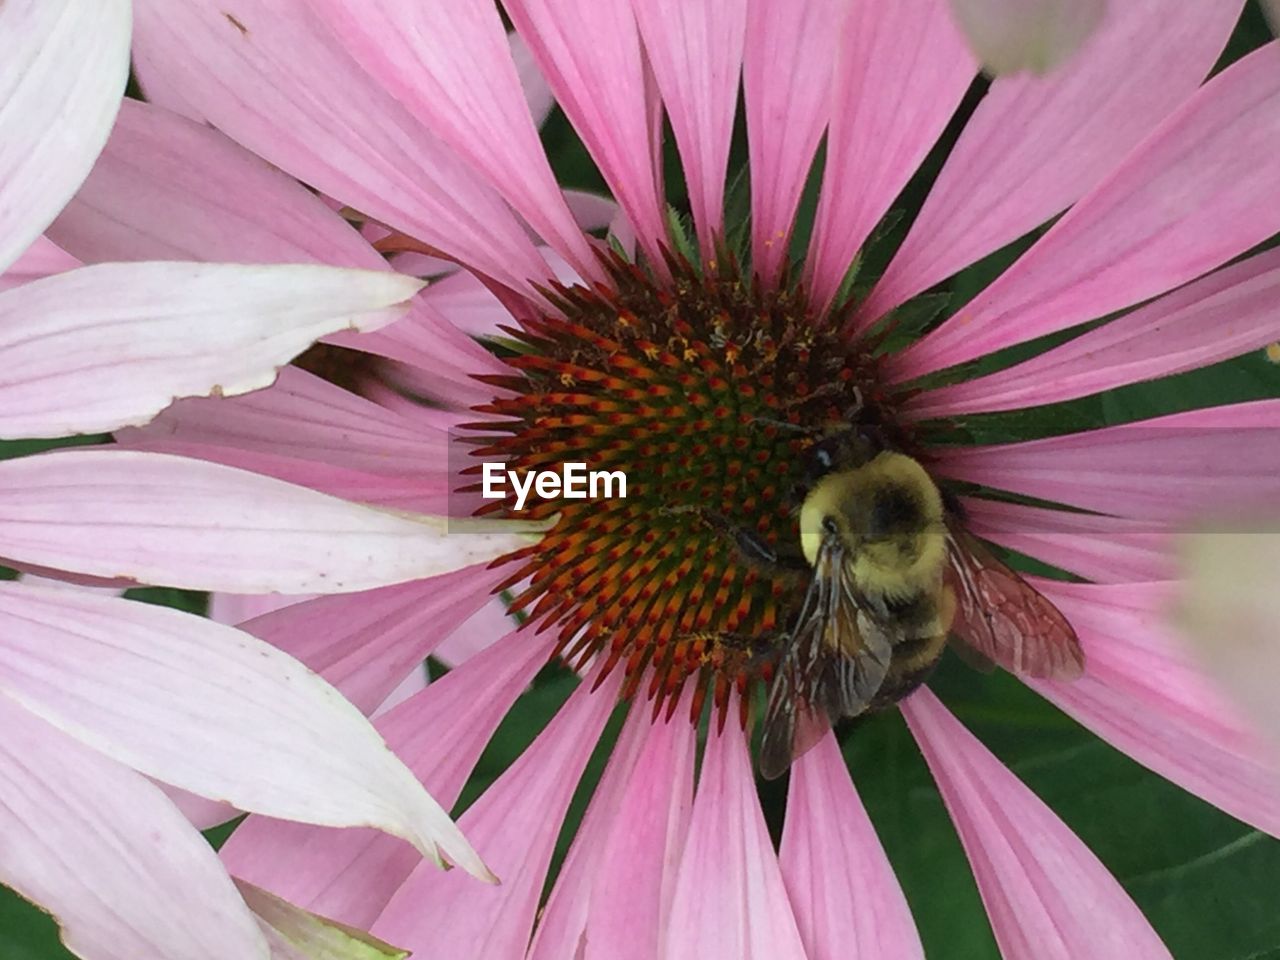 CLOSE-UP OF BEE POLLINATING ON PINK FLOWER